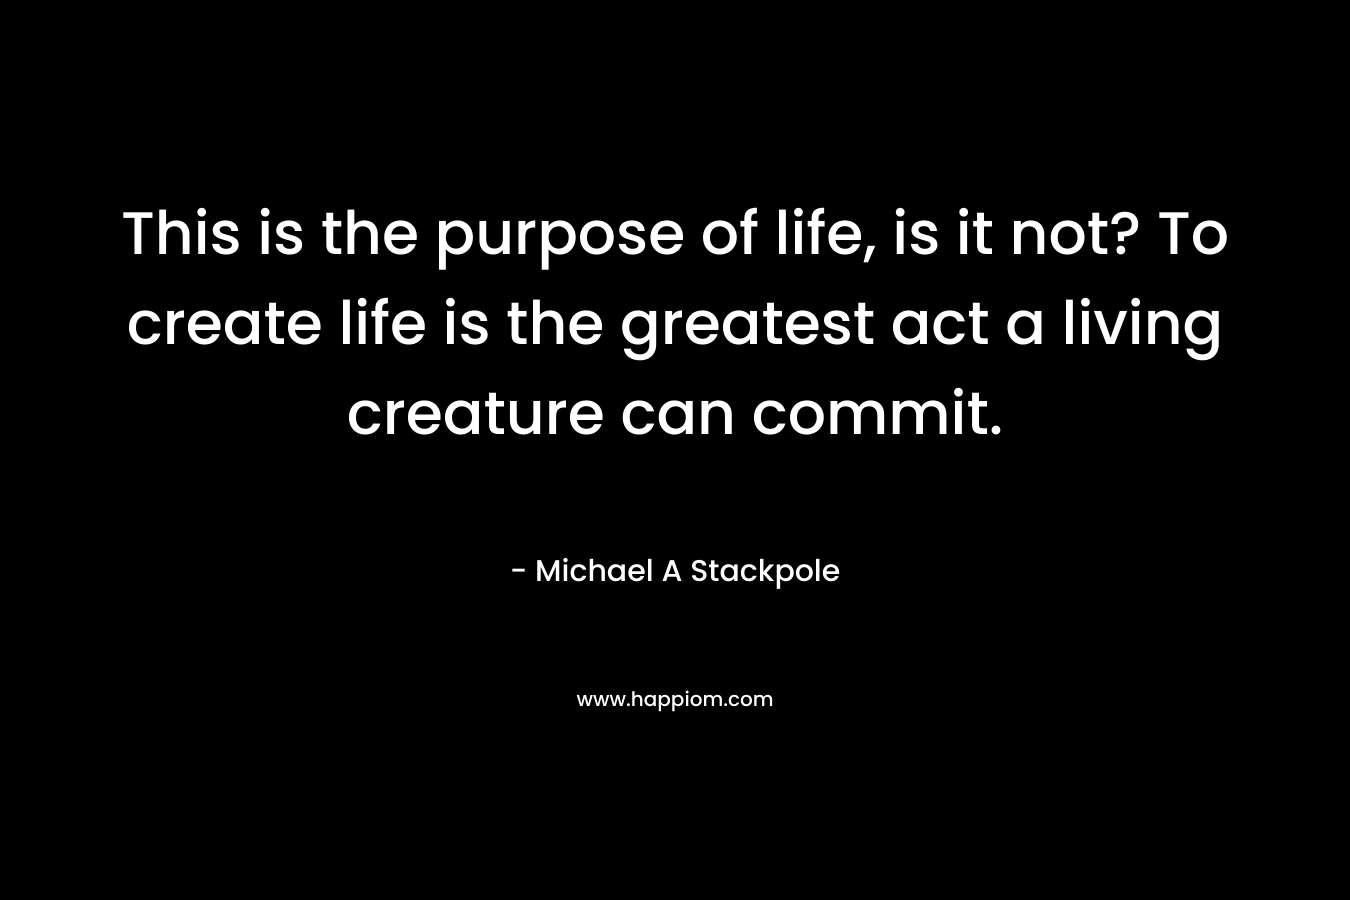 This is the purpose of life, is it not? To create life is the greatest act a living creature can commit. – Michael A Stackpole